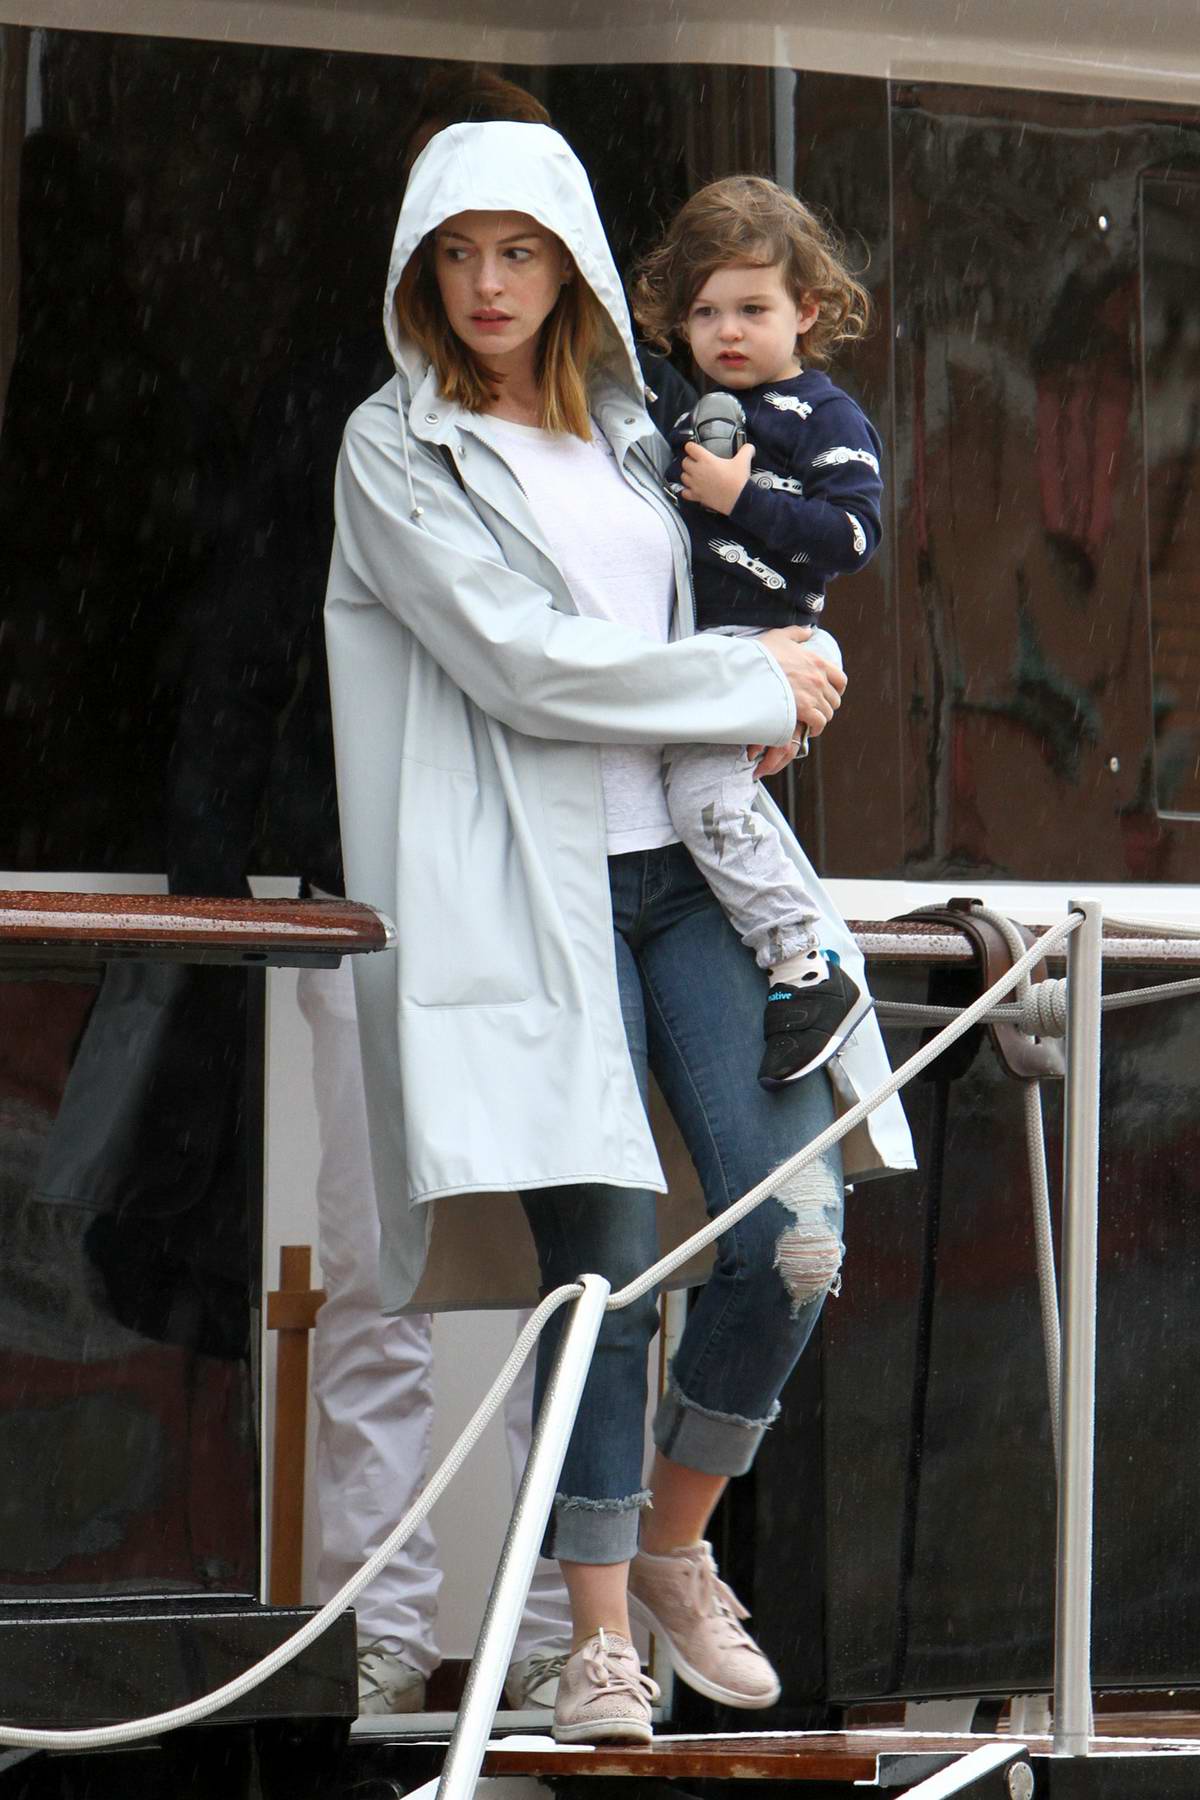 anne-hathaway-and-husband-adam-shulman-steps-out-in-the-rain-with-their-son-in-venice-italy-010918-4-1681407340.jpg